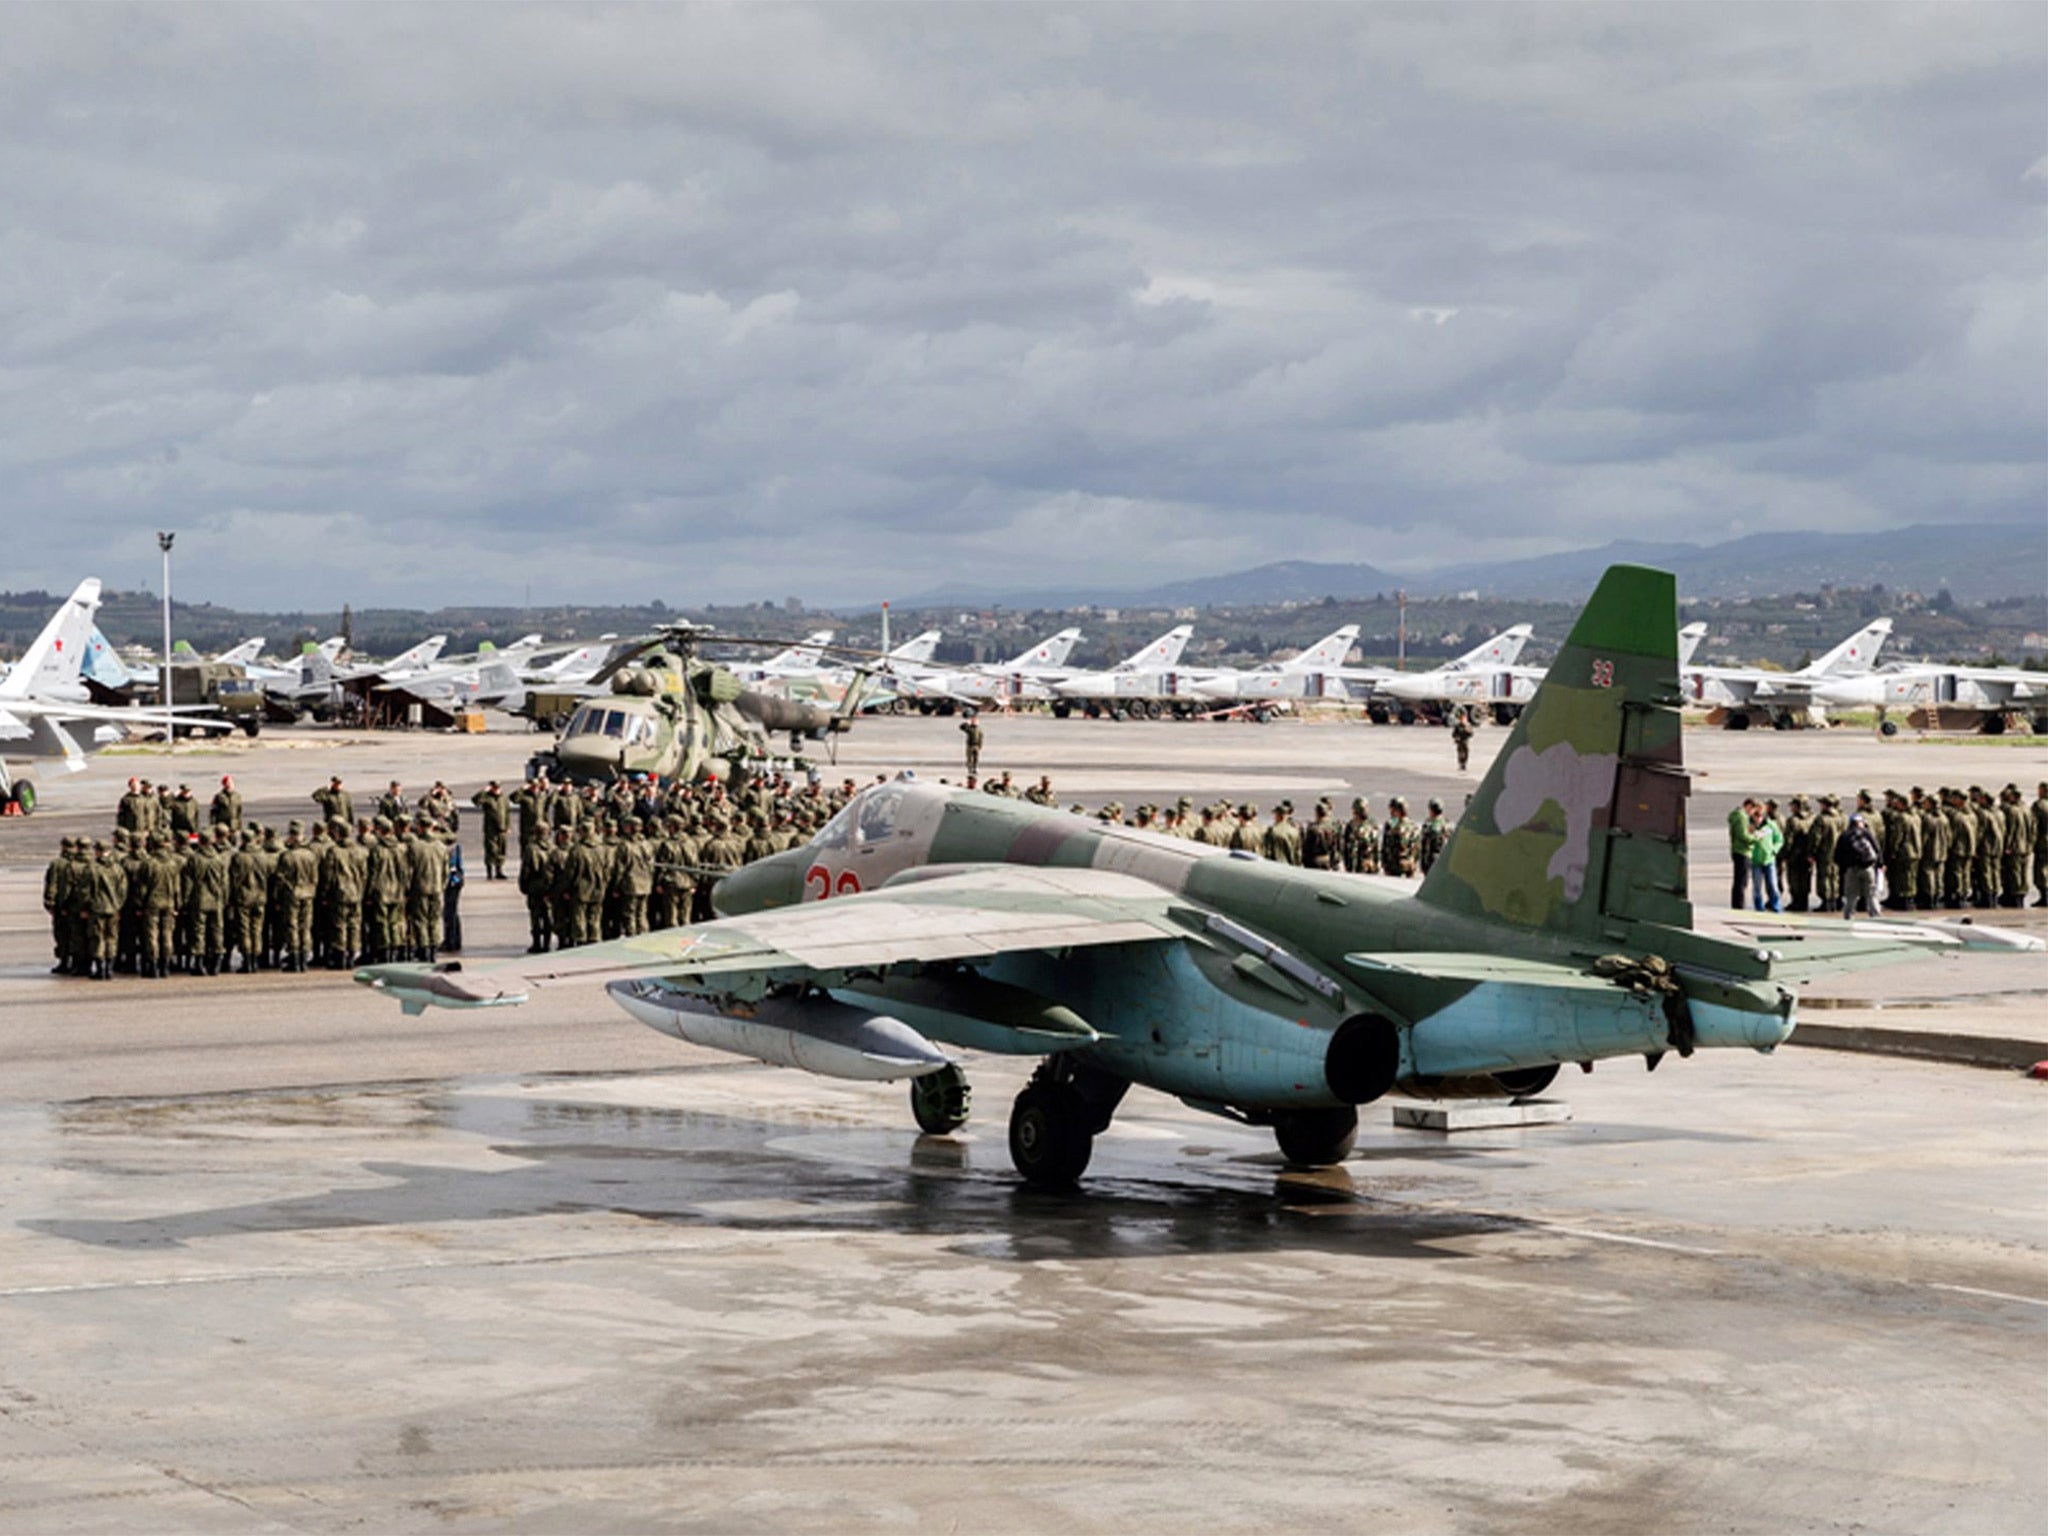 Russian troops at Hemeimeem air base in Syria on Tuesday